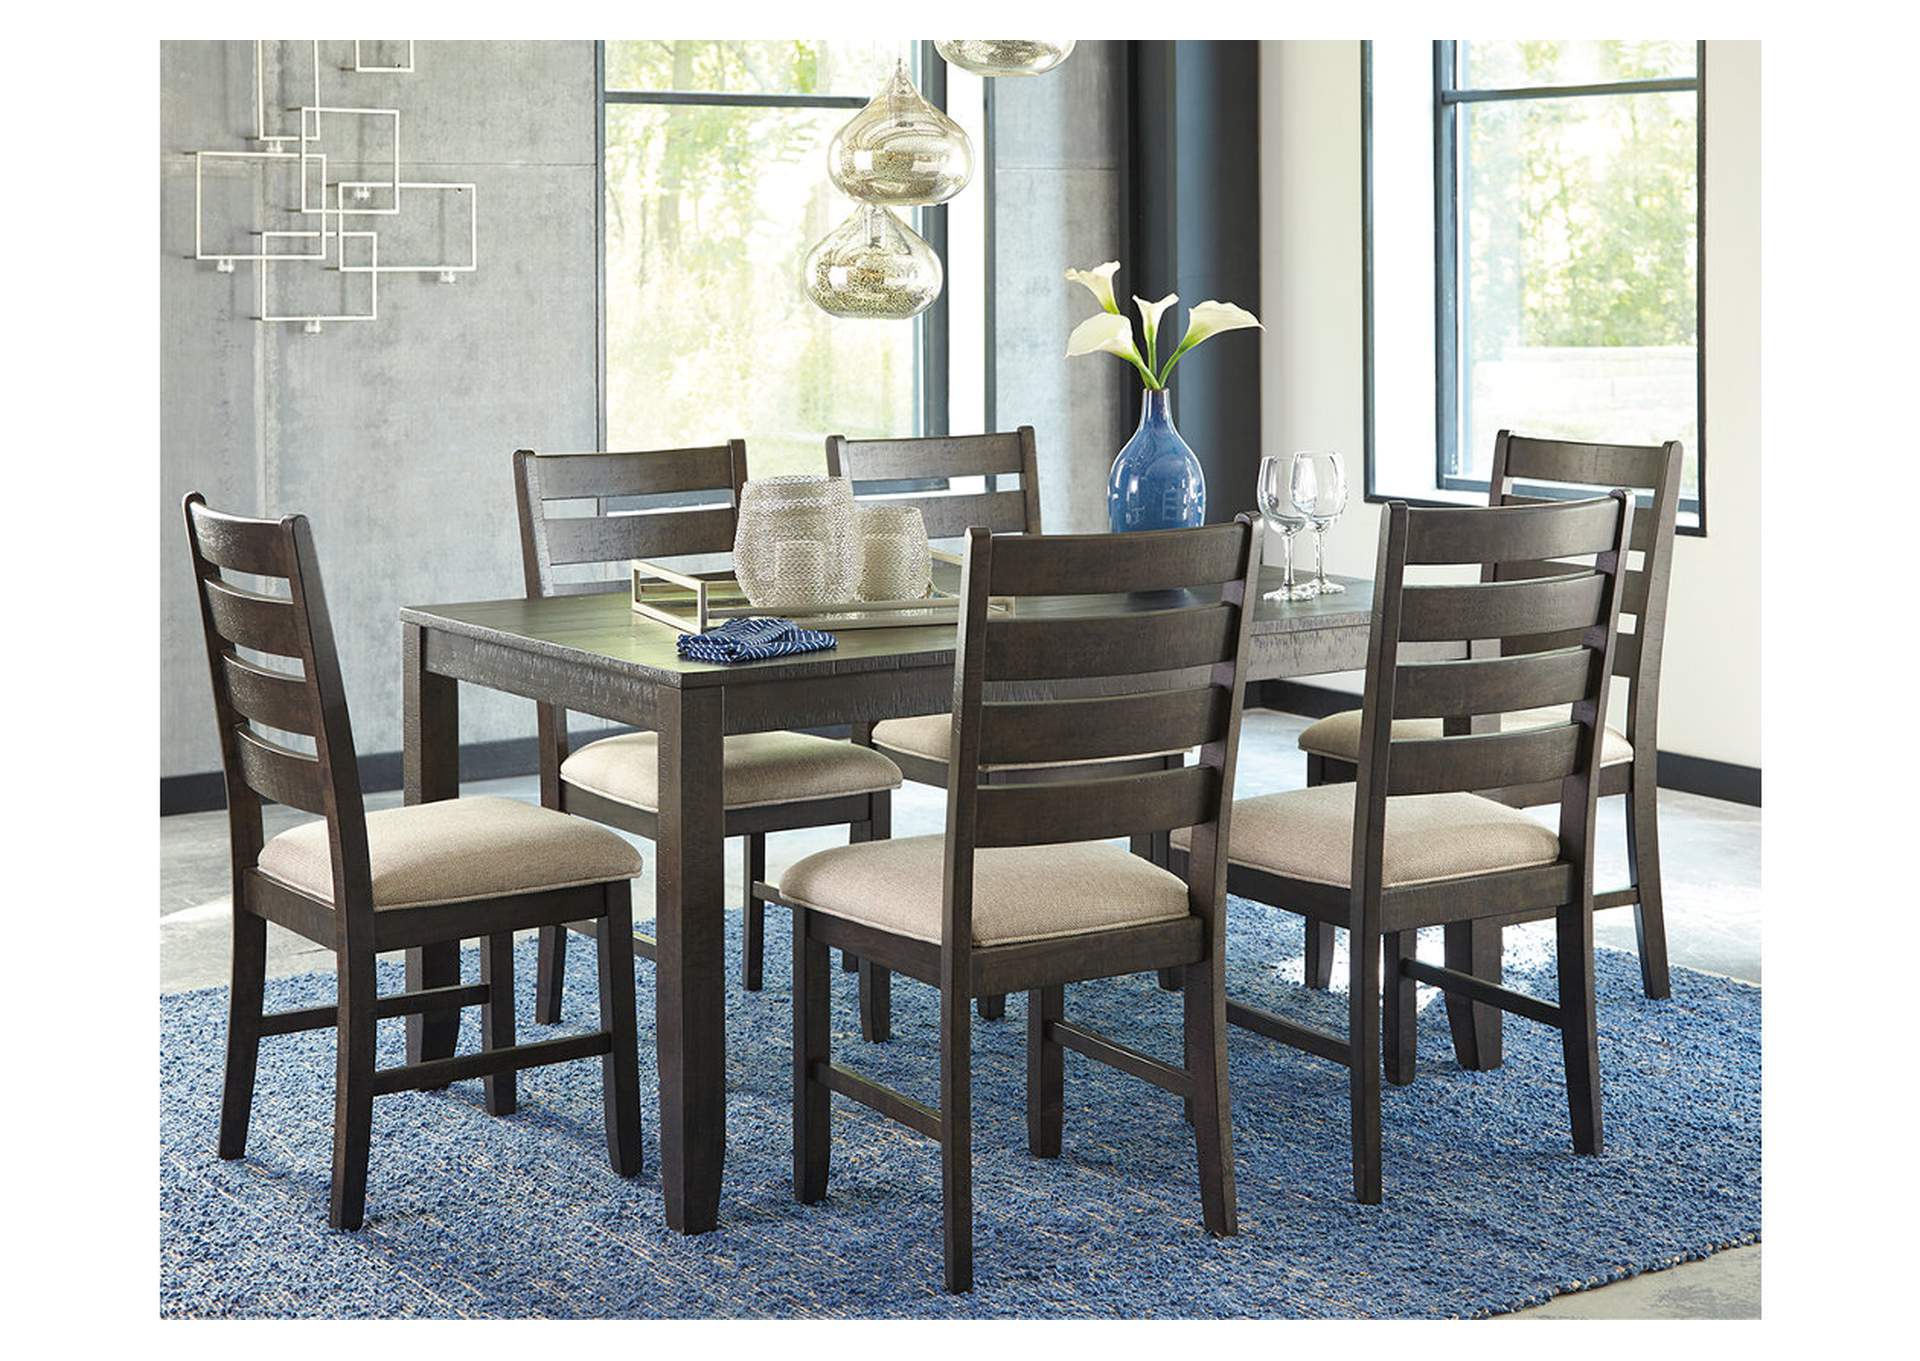 Rokane Dining Room Table and Chairs (Set of 7) Home Furniture and